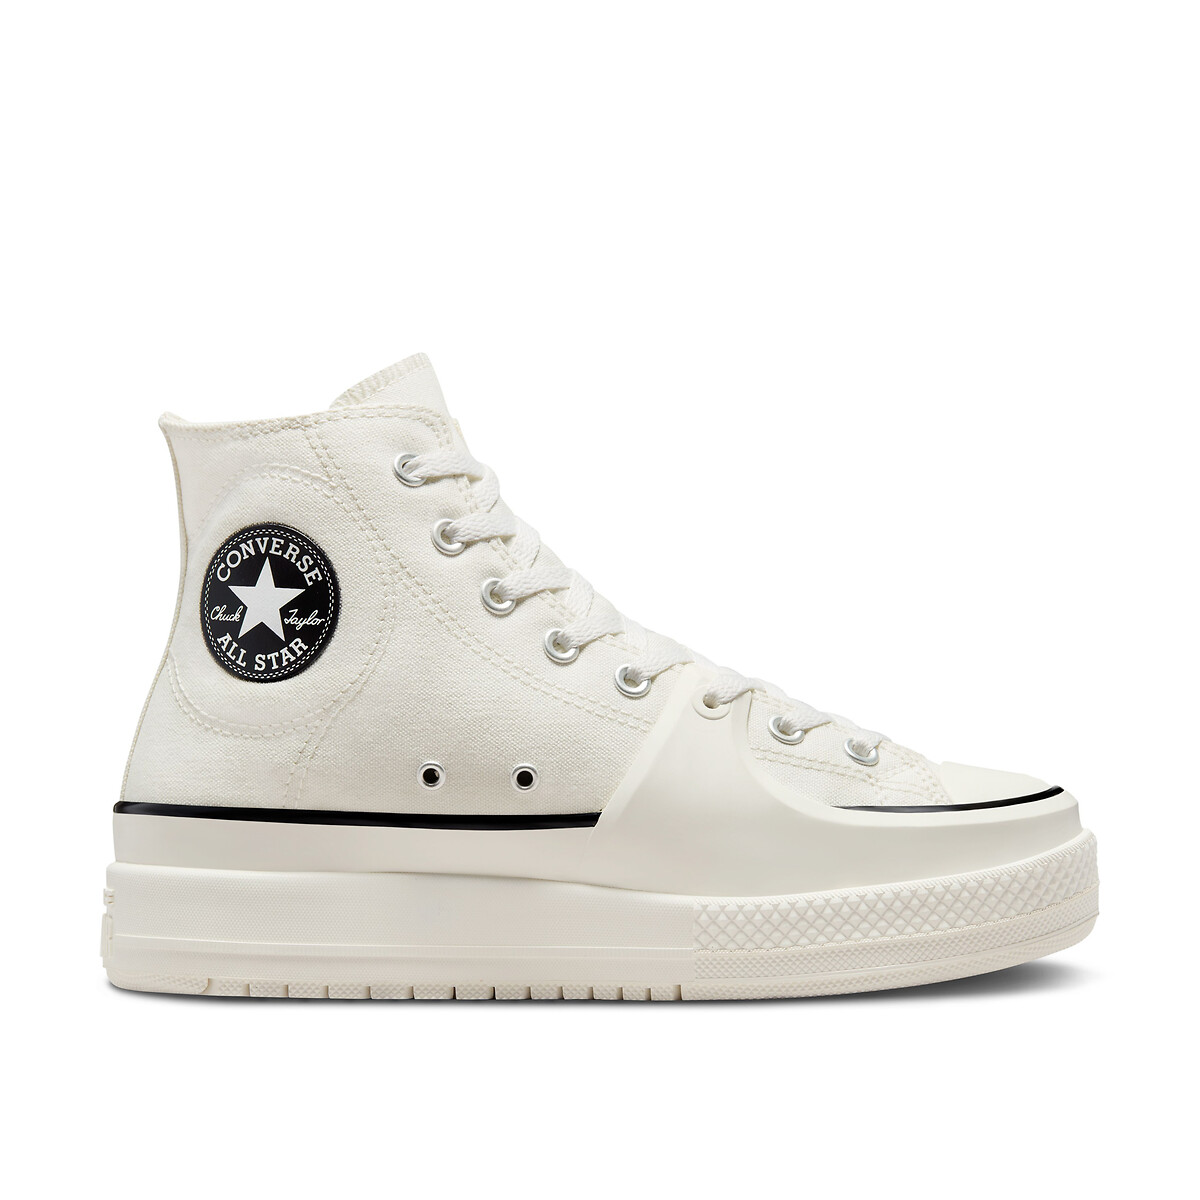 Image of All Star Construct Hi Utility Canvas High Top Trainers